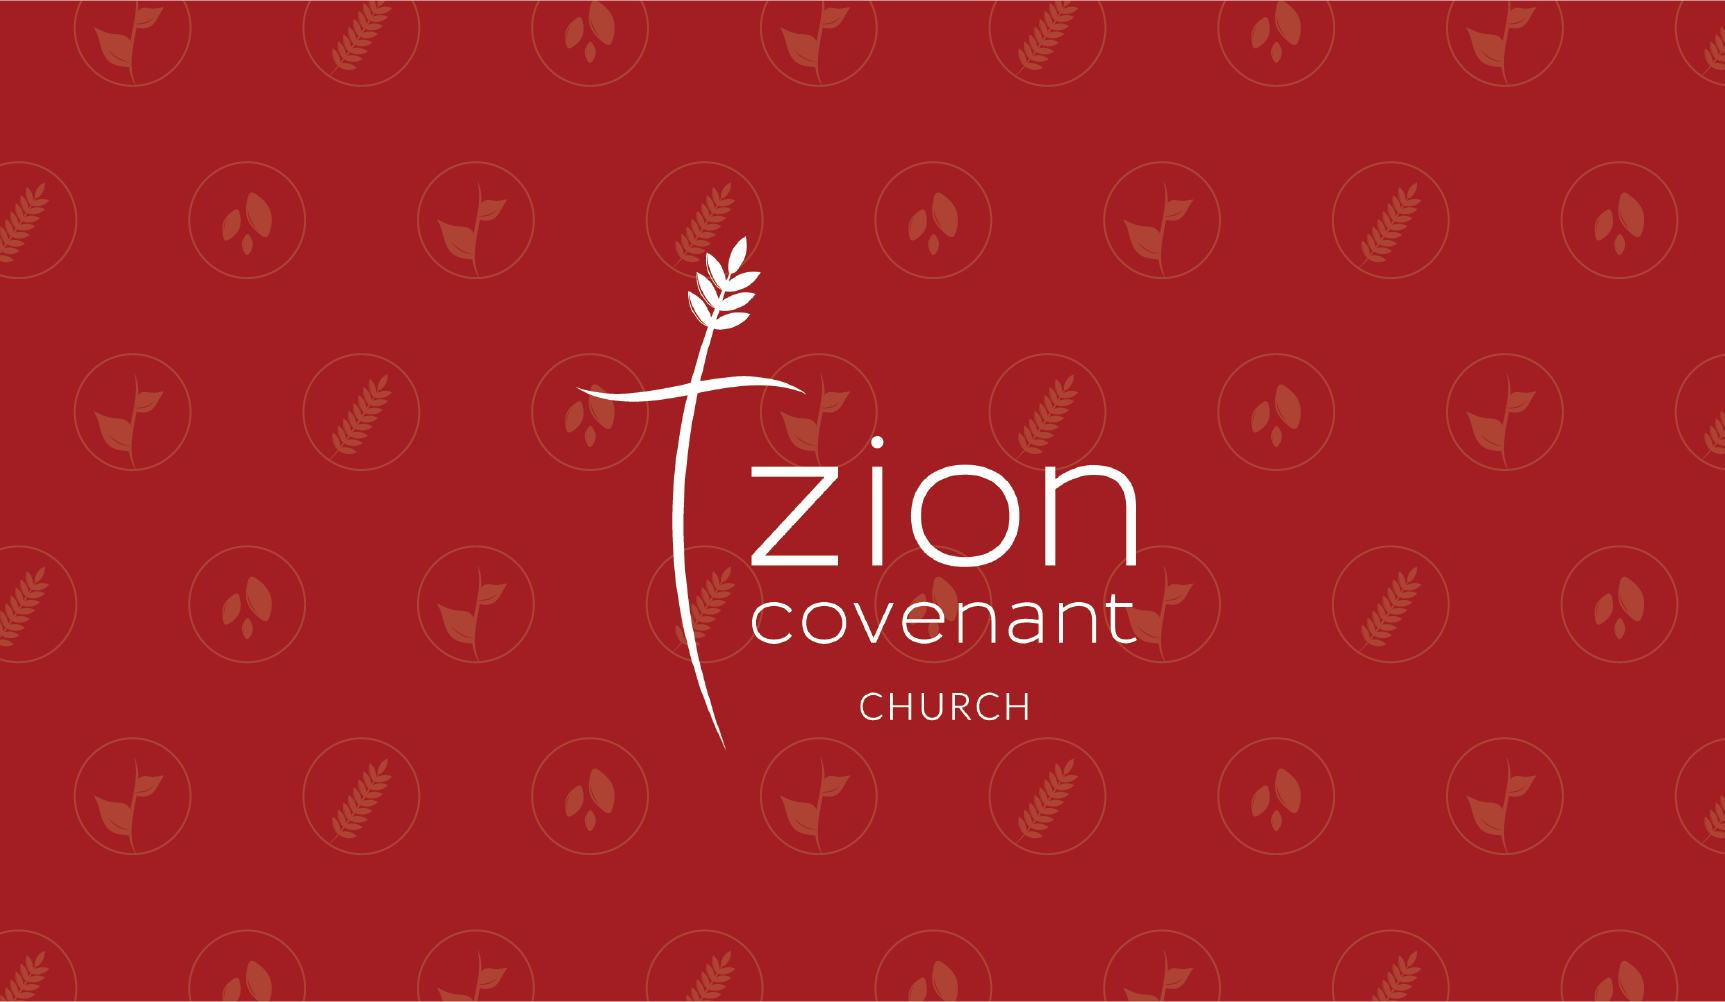 Zion Covenant Church Logo and Branding Design by AllieMarie Design